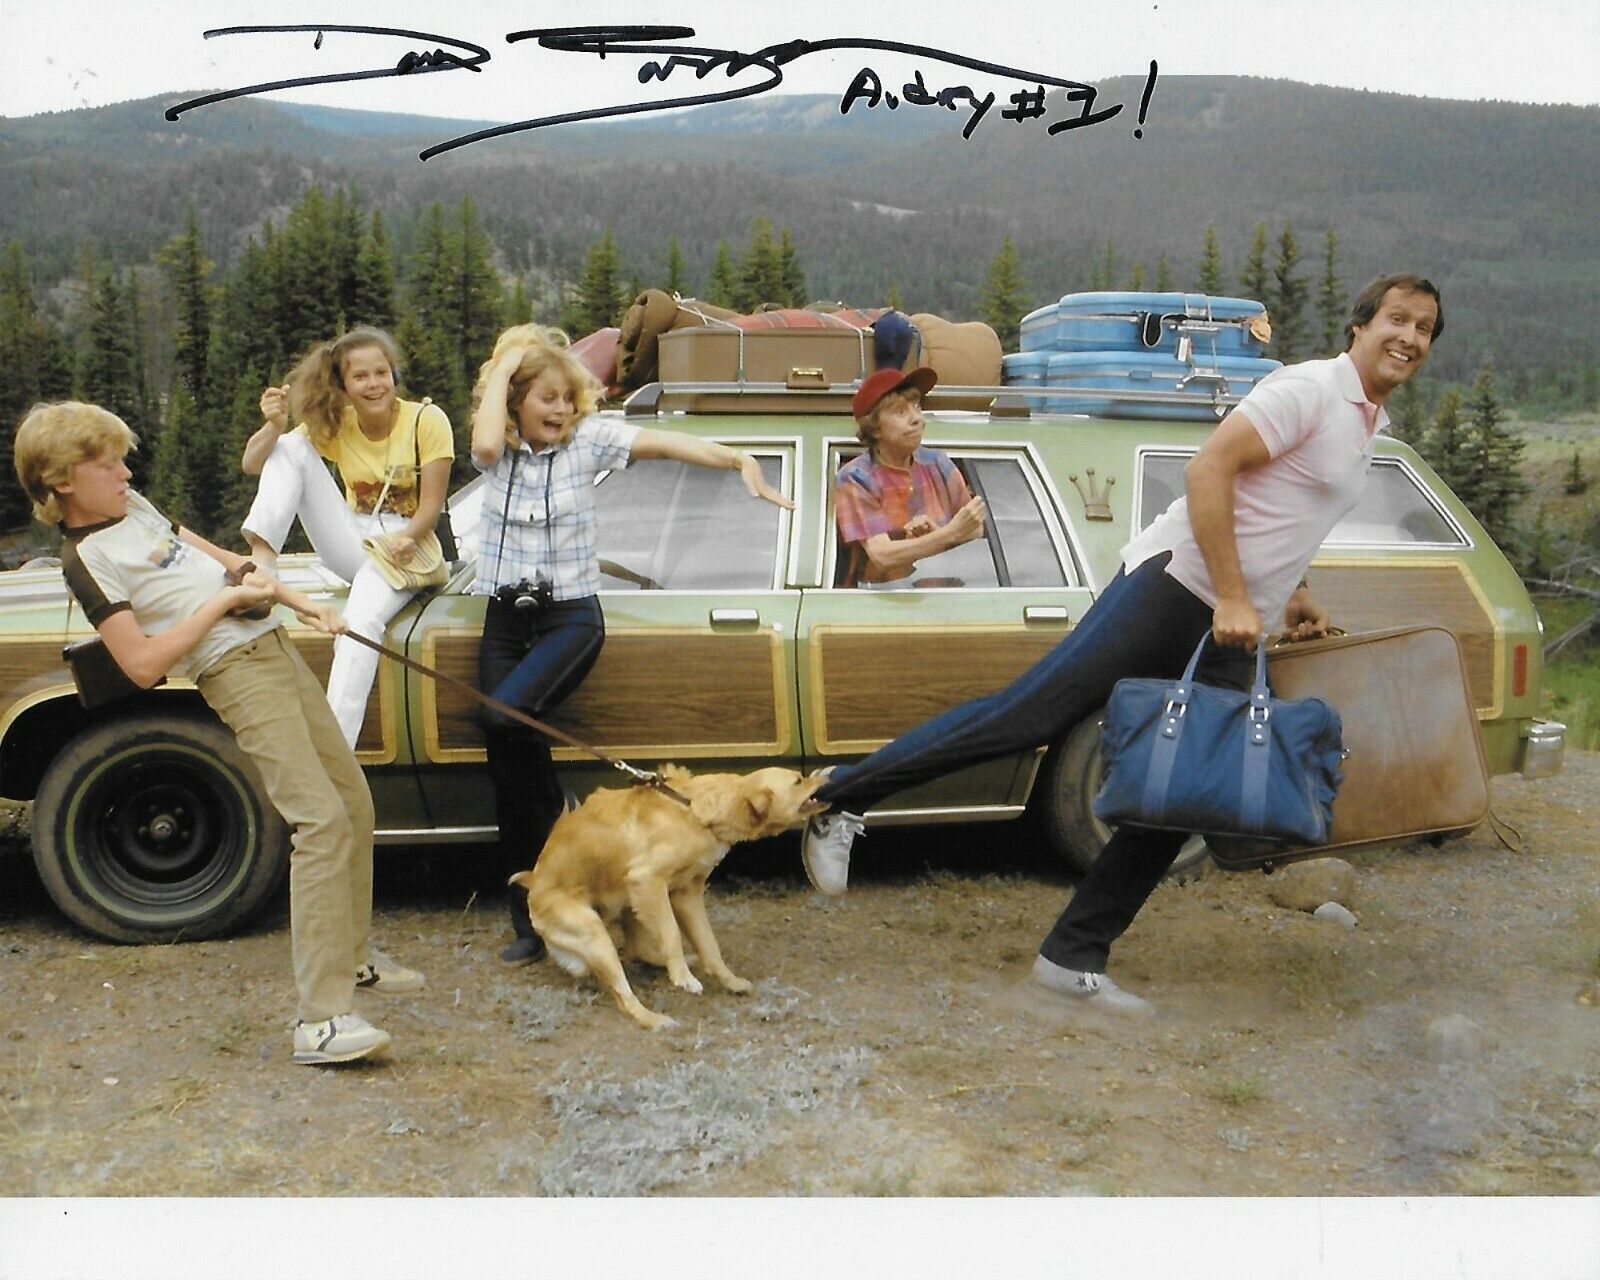 Dana Barron Vacation Original Autographed 8X10 Photo Poster painting signed at Hollywood Show #3